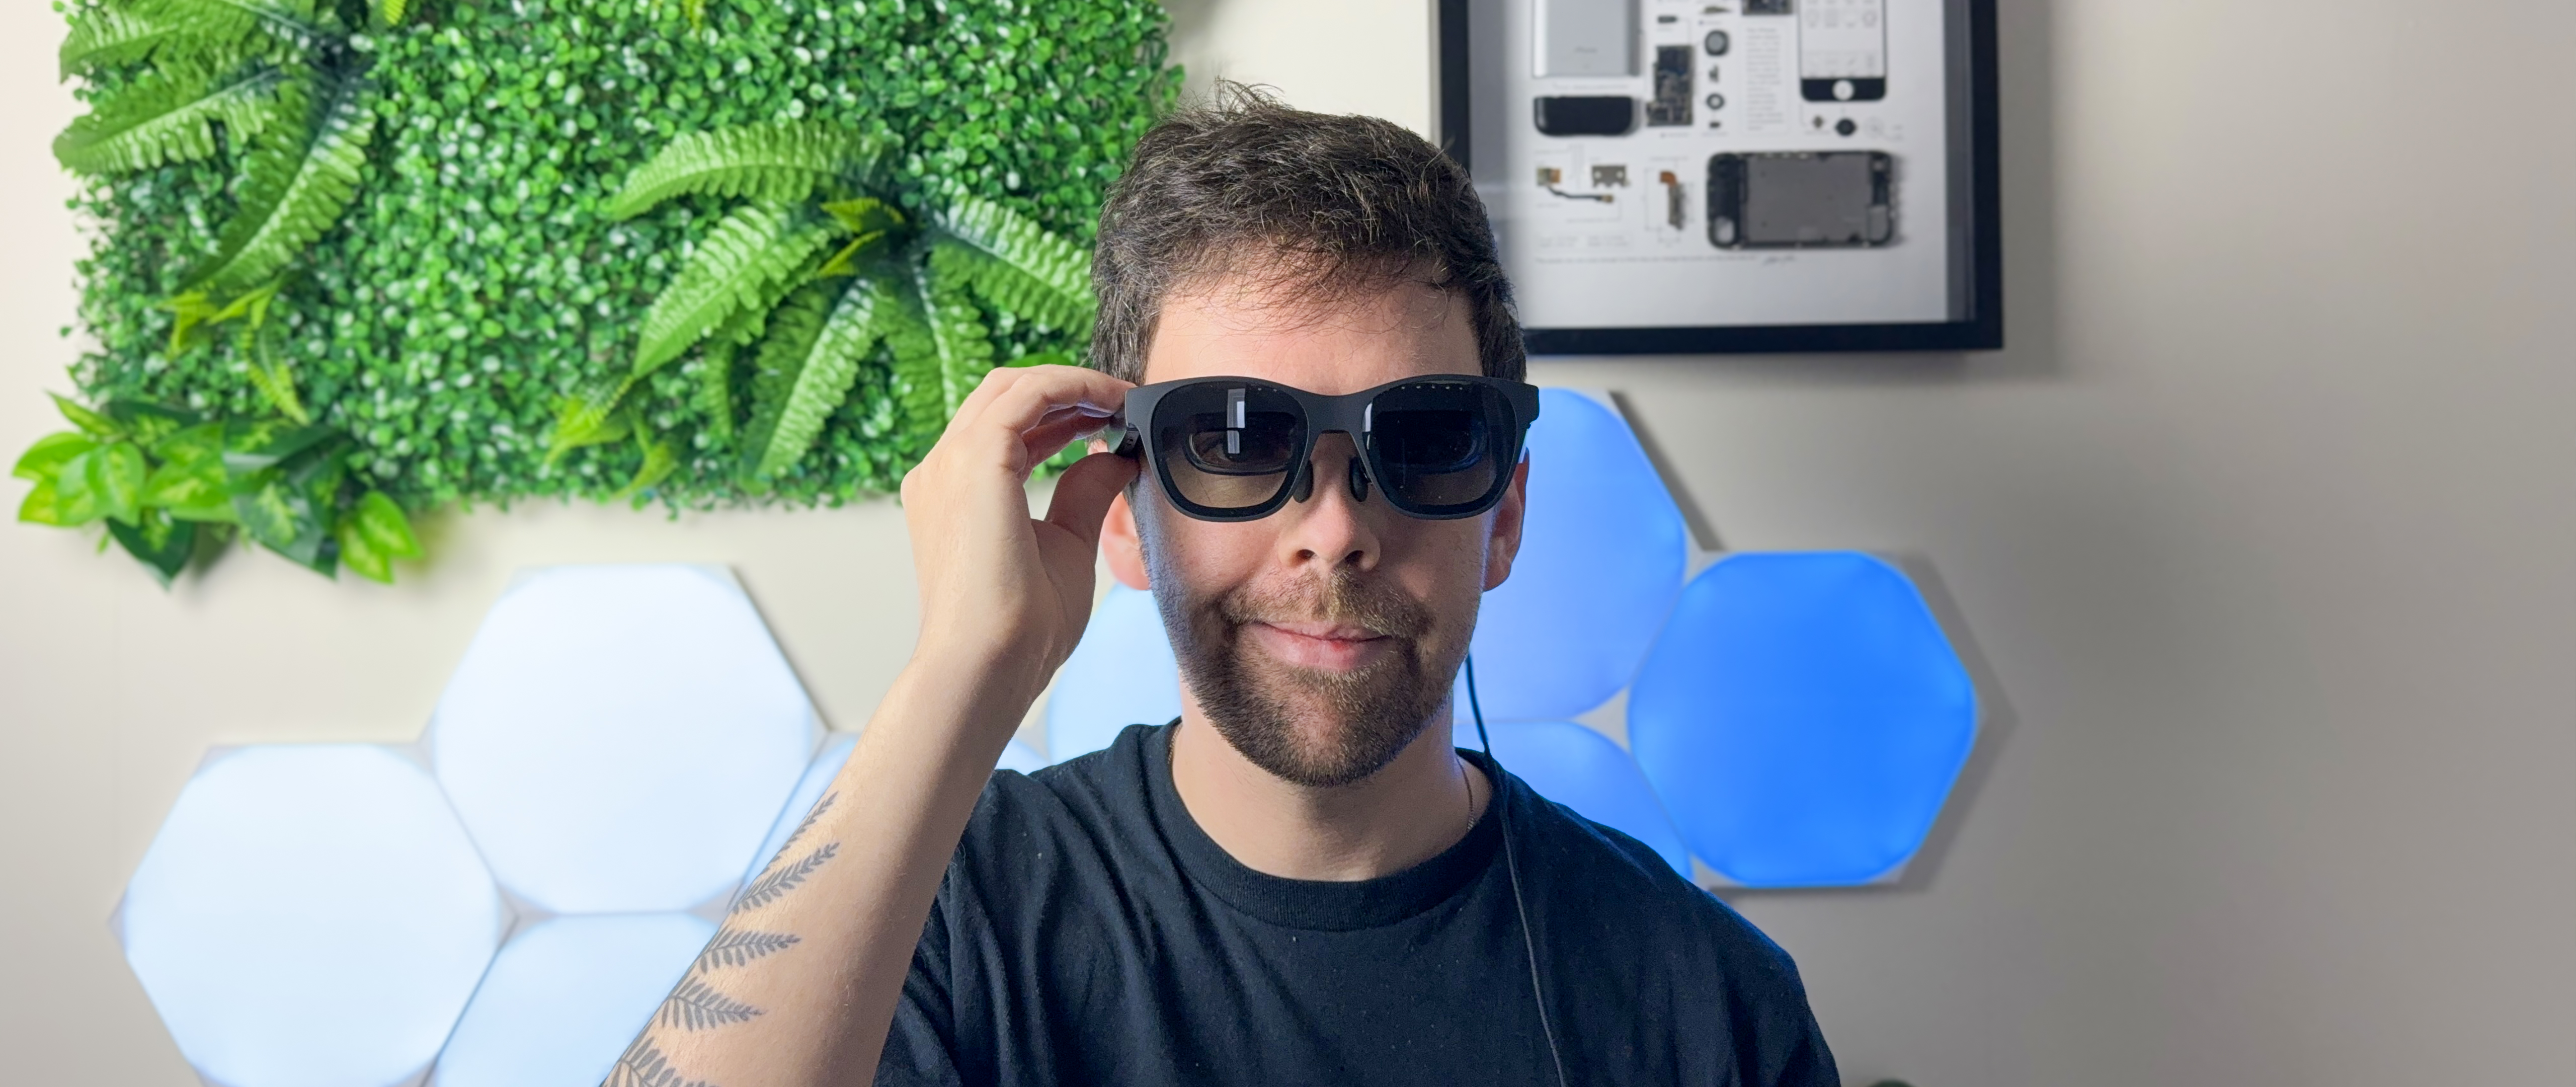 Xreal Air 2 AR glasses review: A first glimpse of spatial